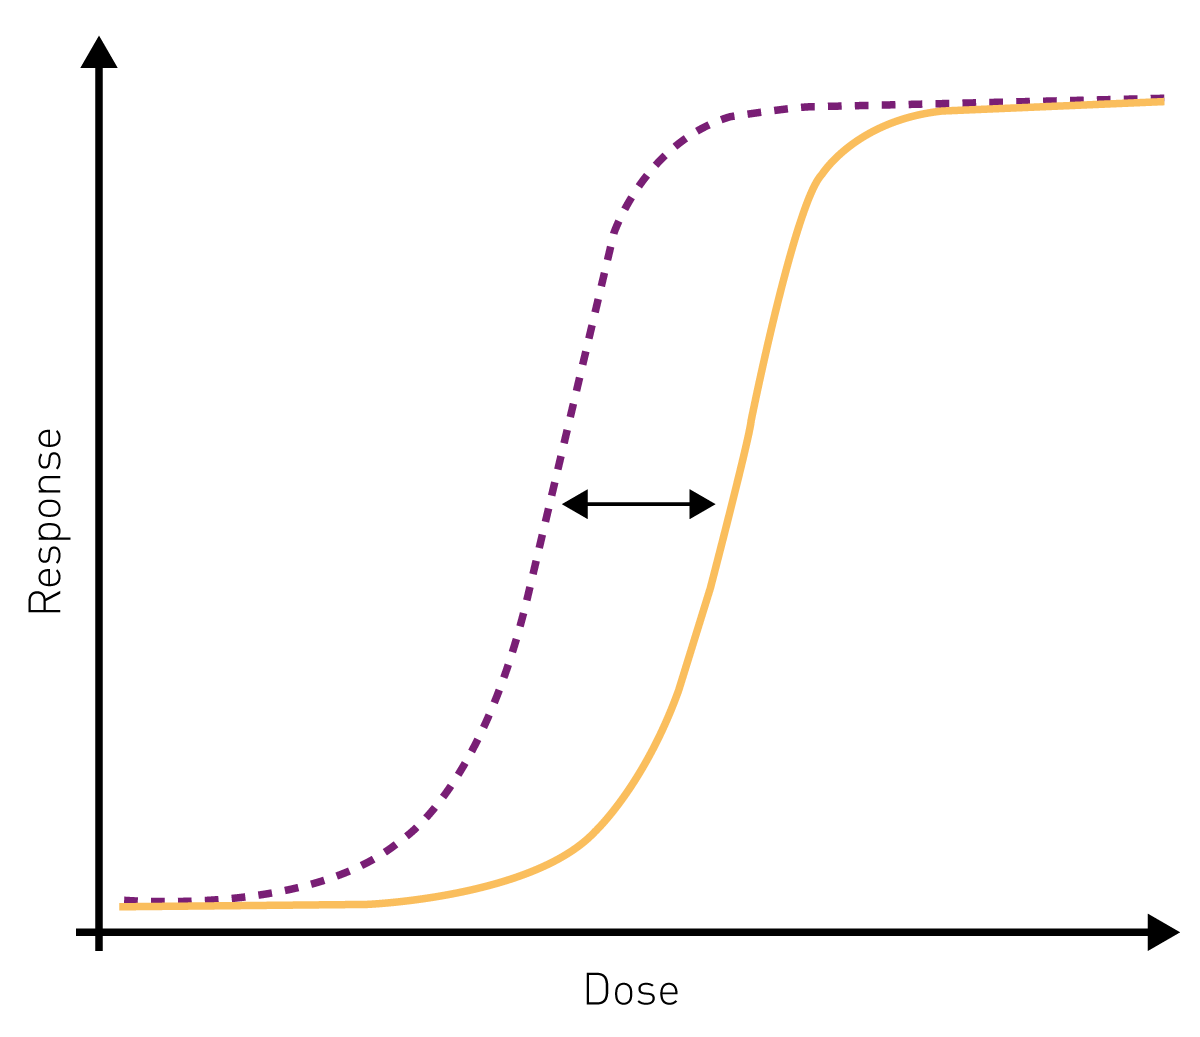 Fig. 1: Parallel Line Analysis is typically used to estimate the relative potency (black arrow) of a test substance (orange) compared to a reference substance (purple).